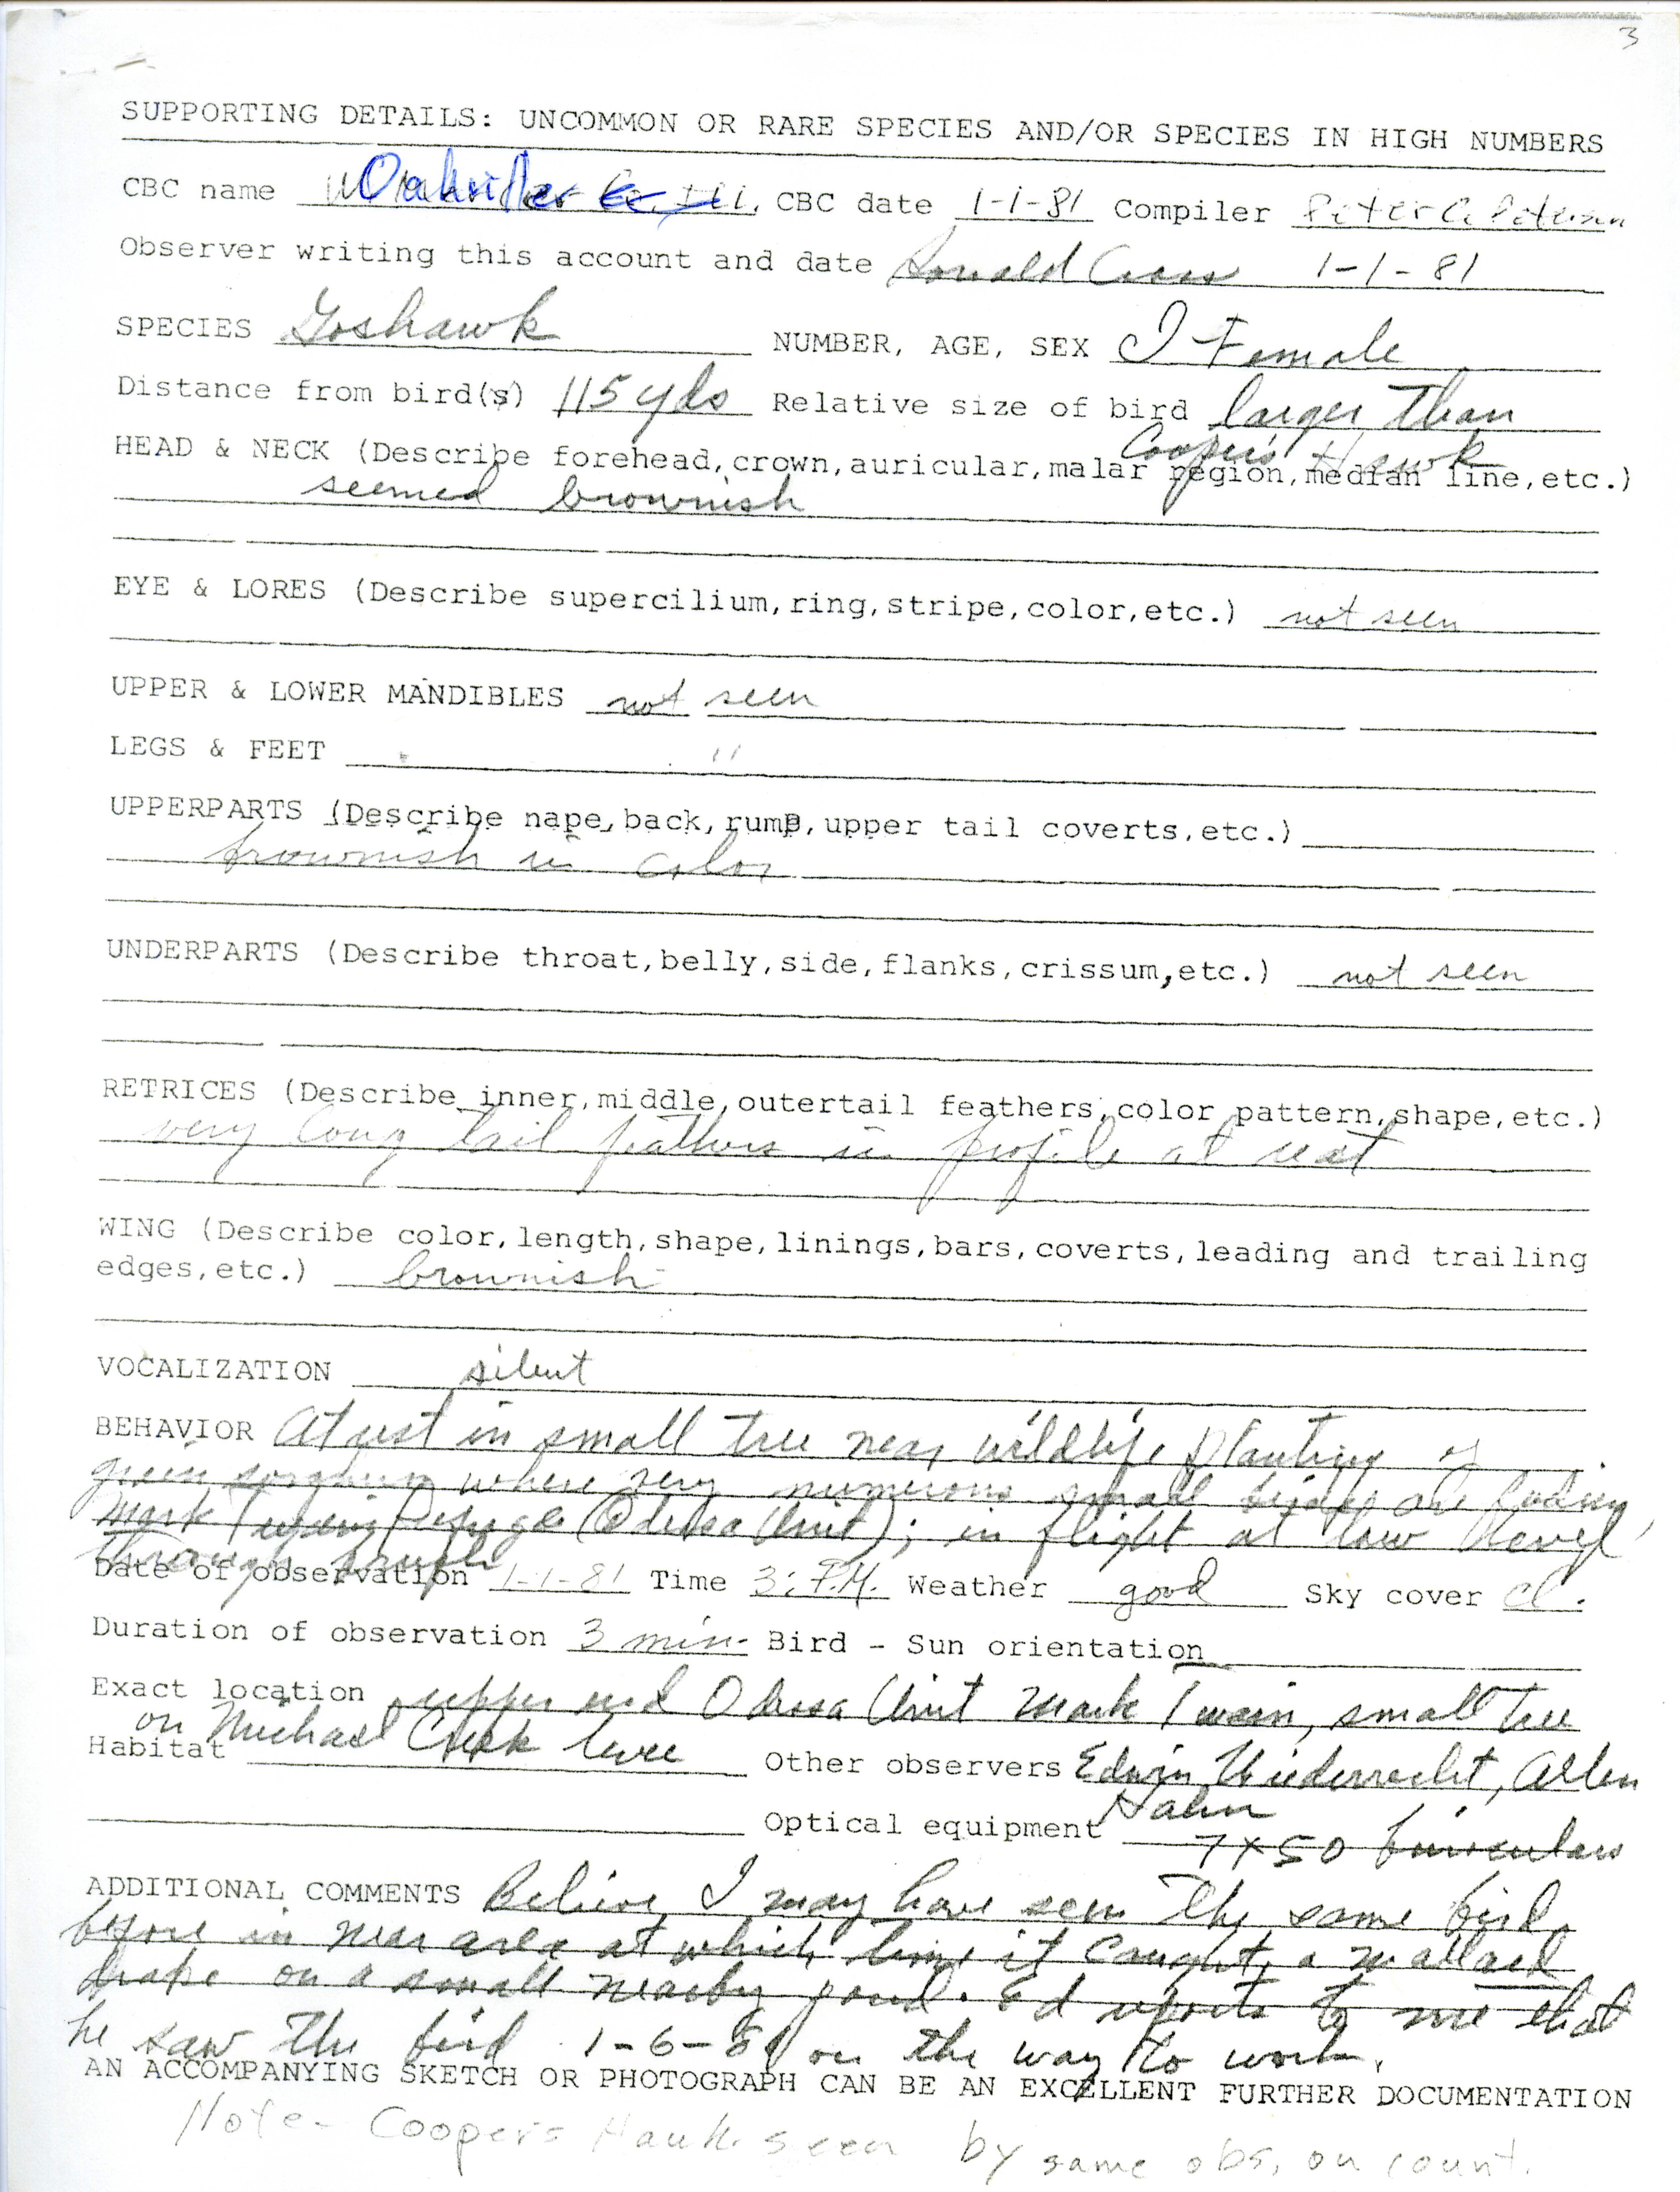 Supporting details form for Goshawk sighting submitted by Donald Cross, January 1 1981